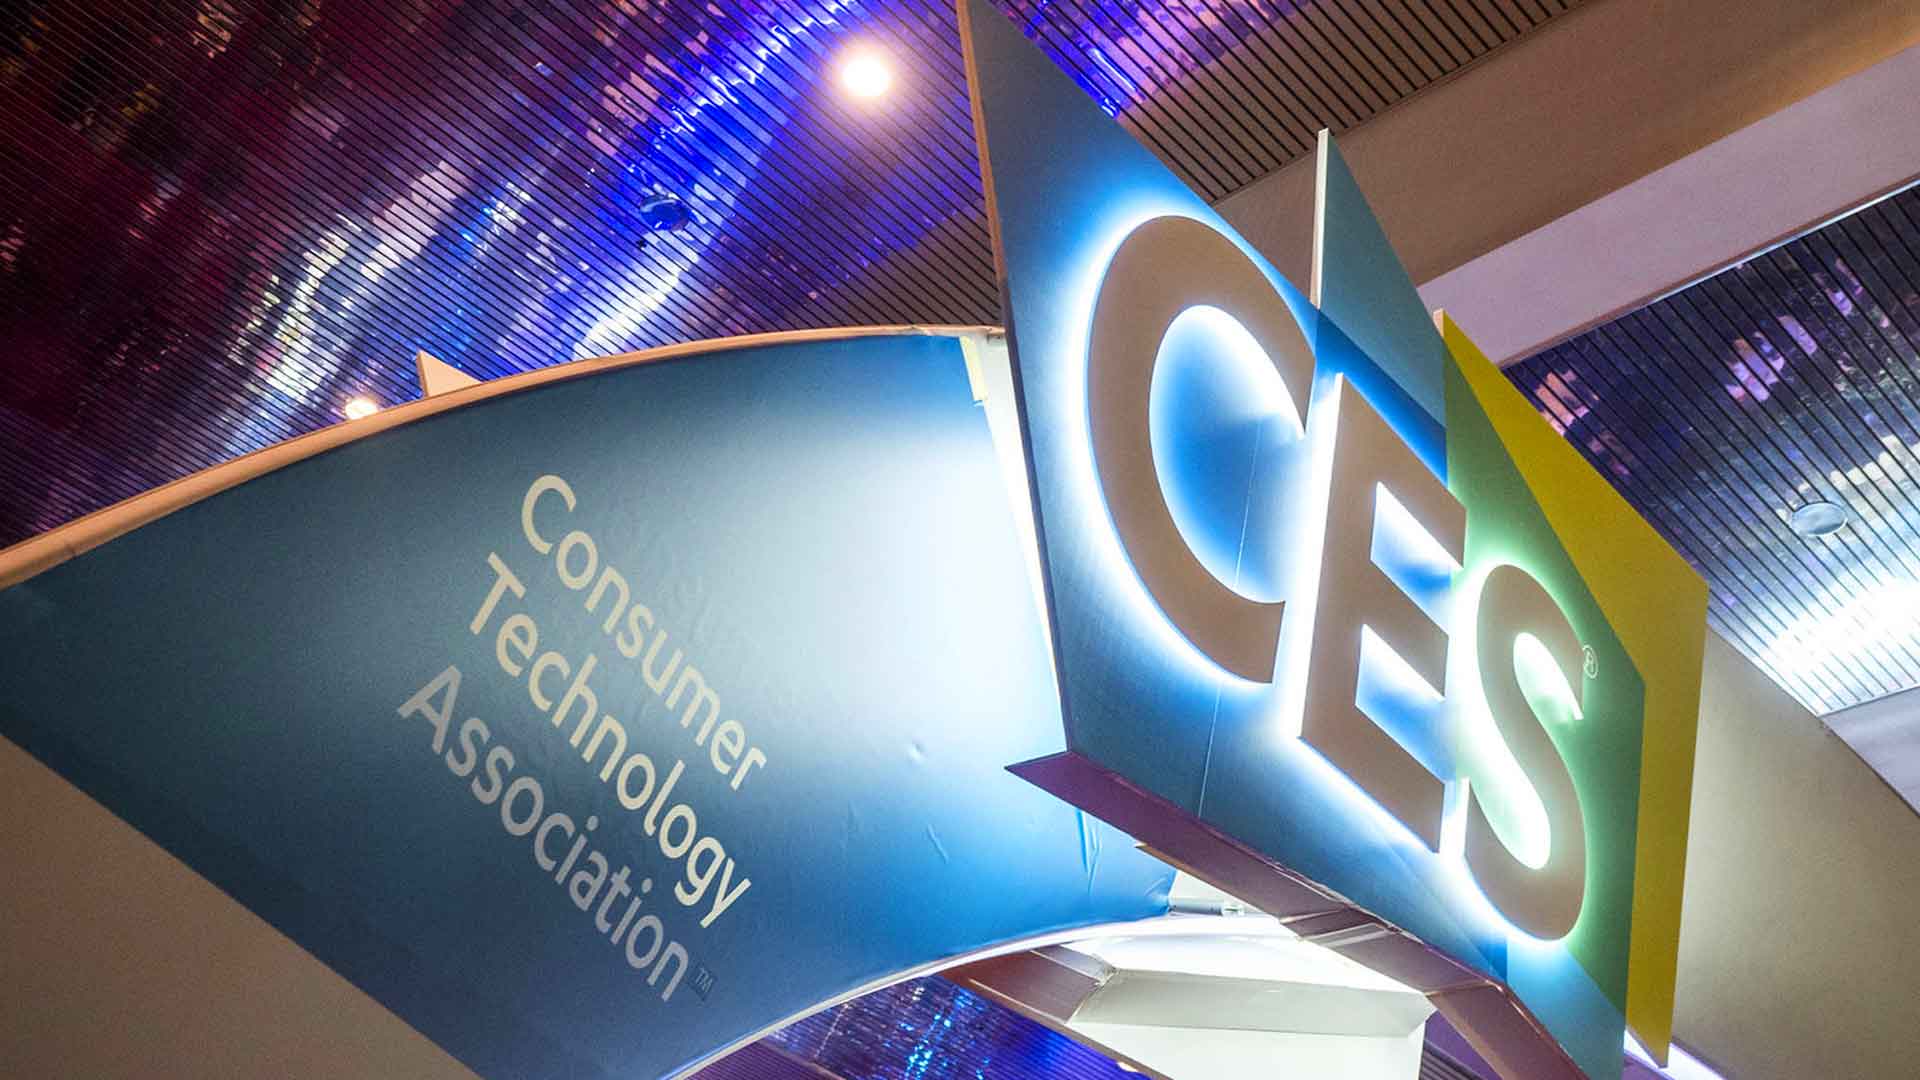 10 Ways To Get The Most Out Of Your CES Experience